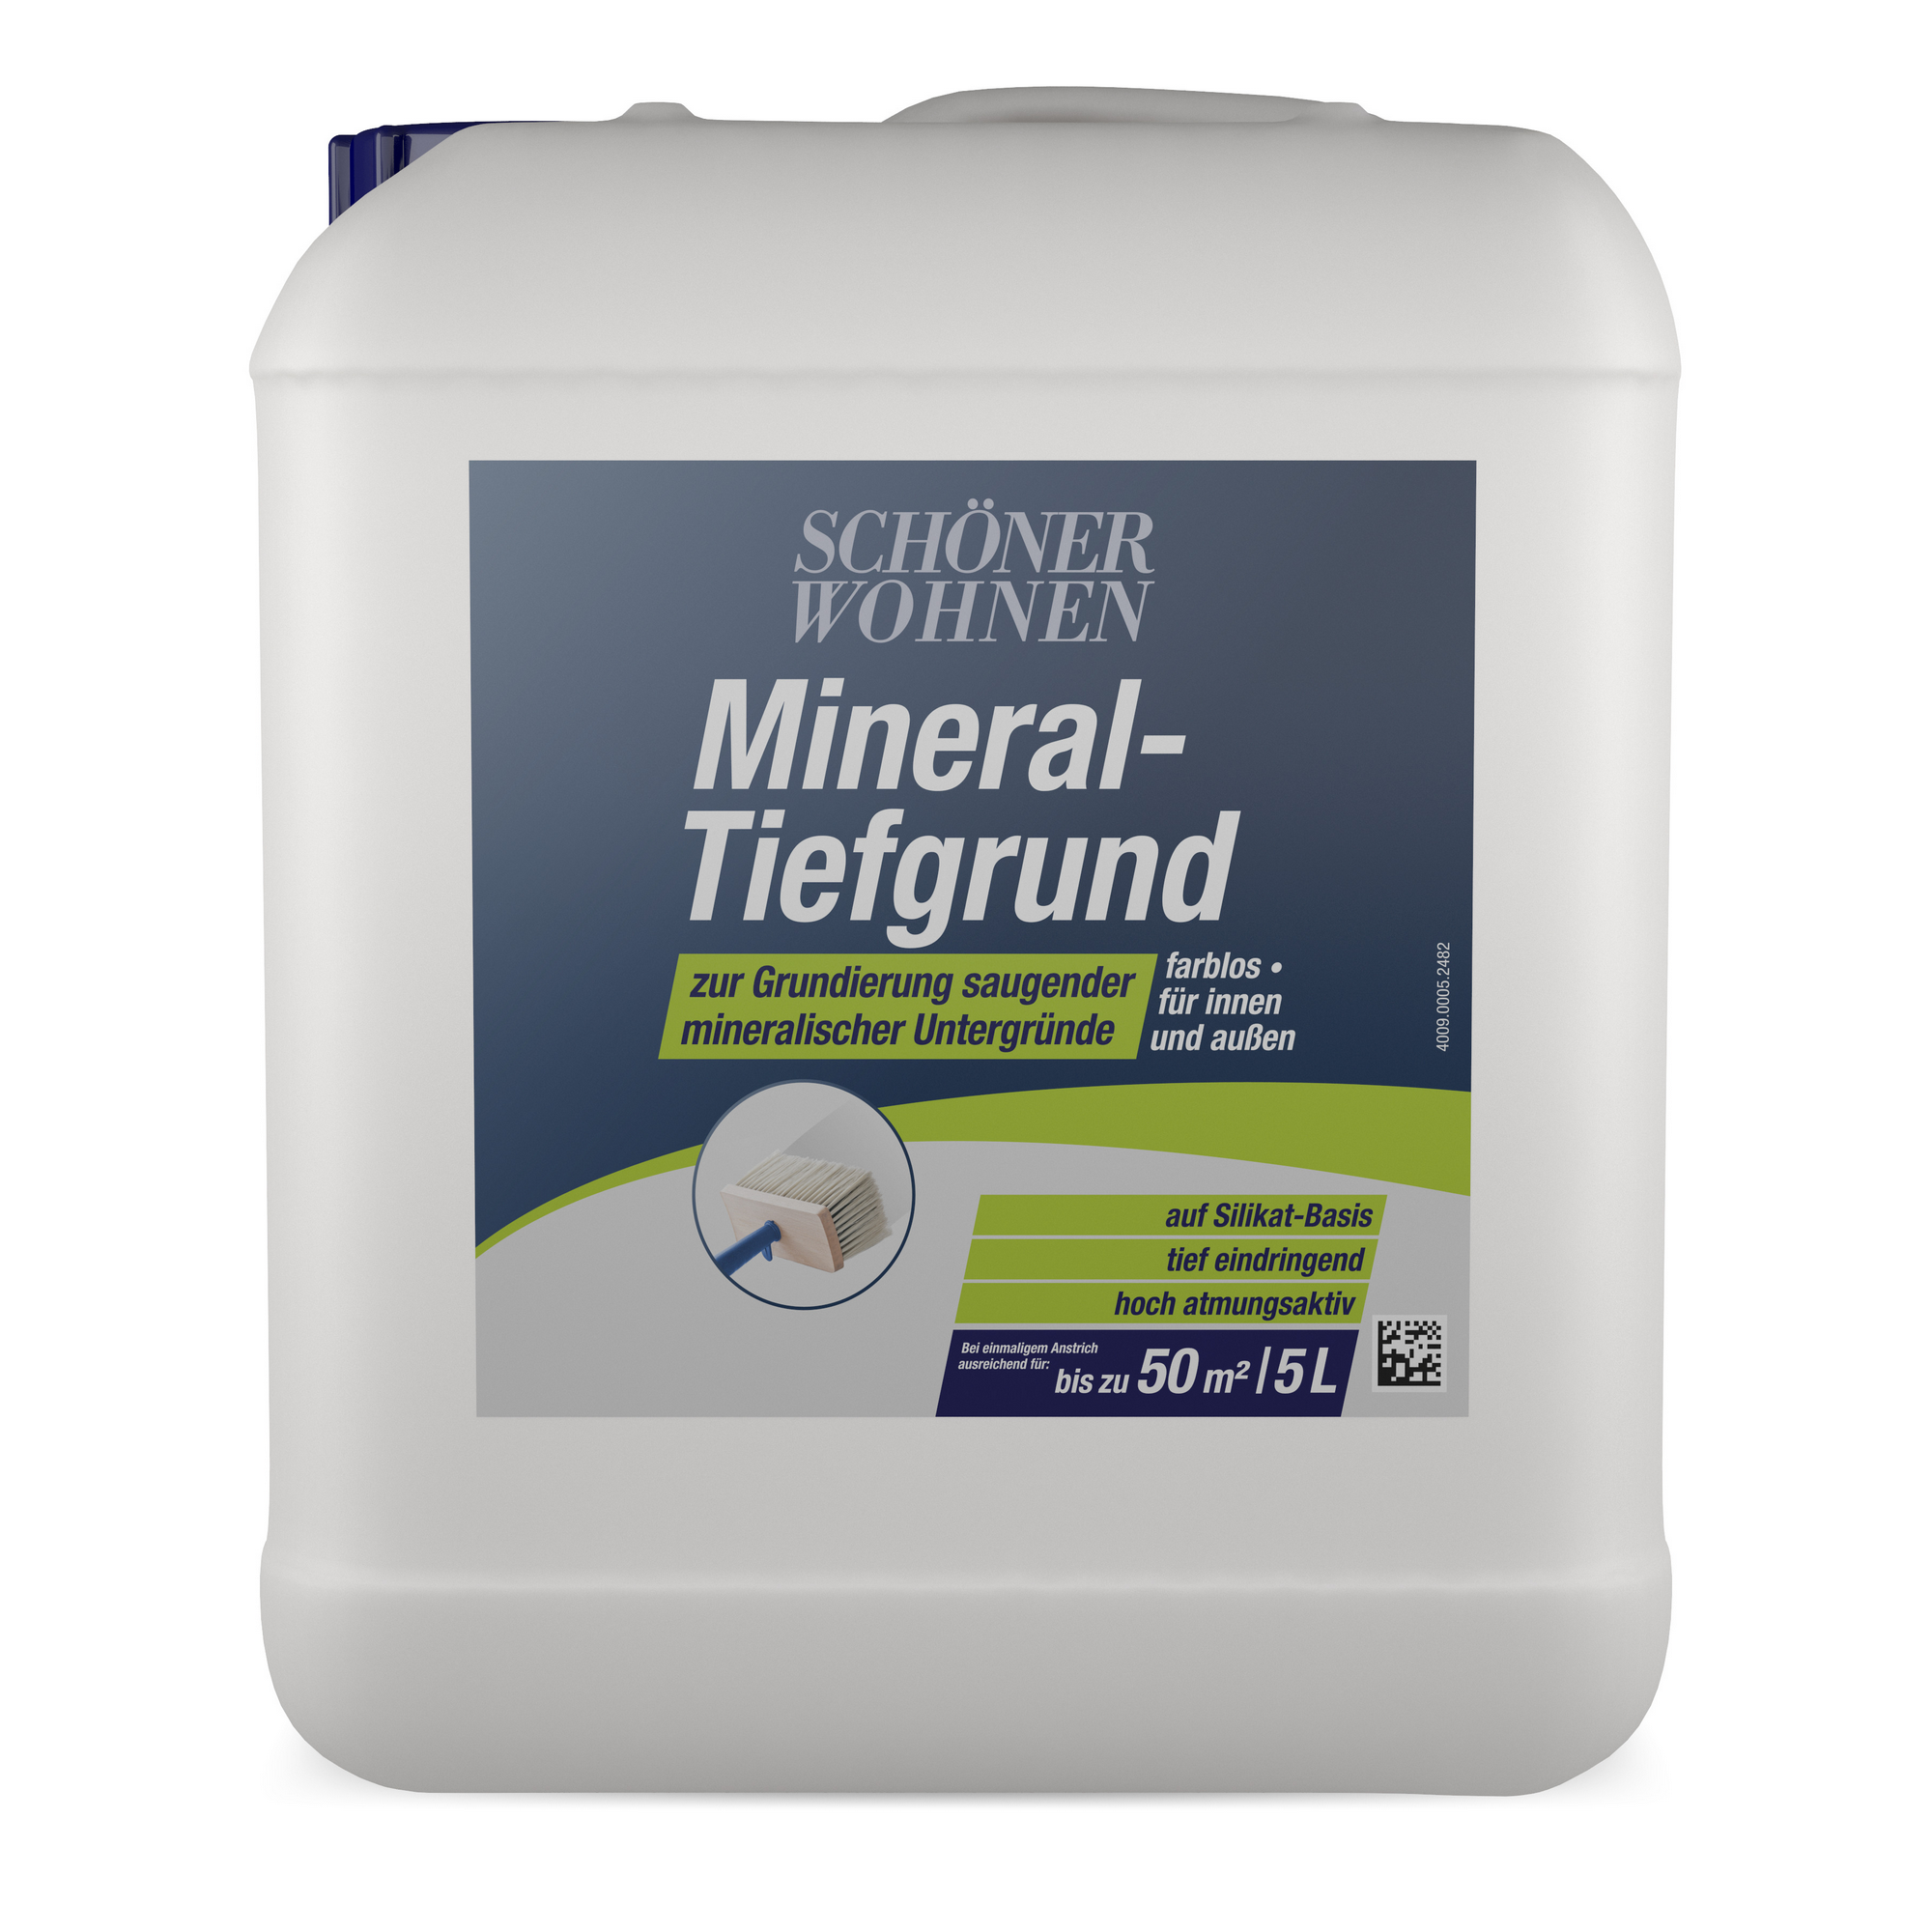 Mineral-Tiefgrund farblos 5 l + product picture